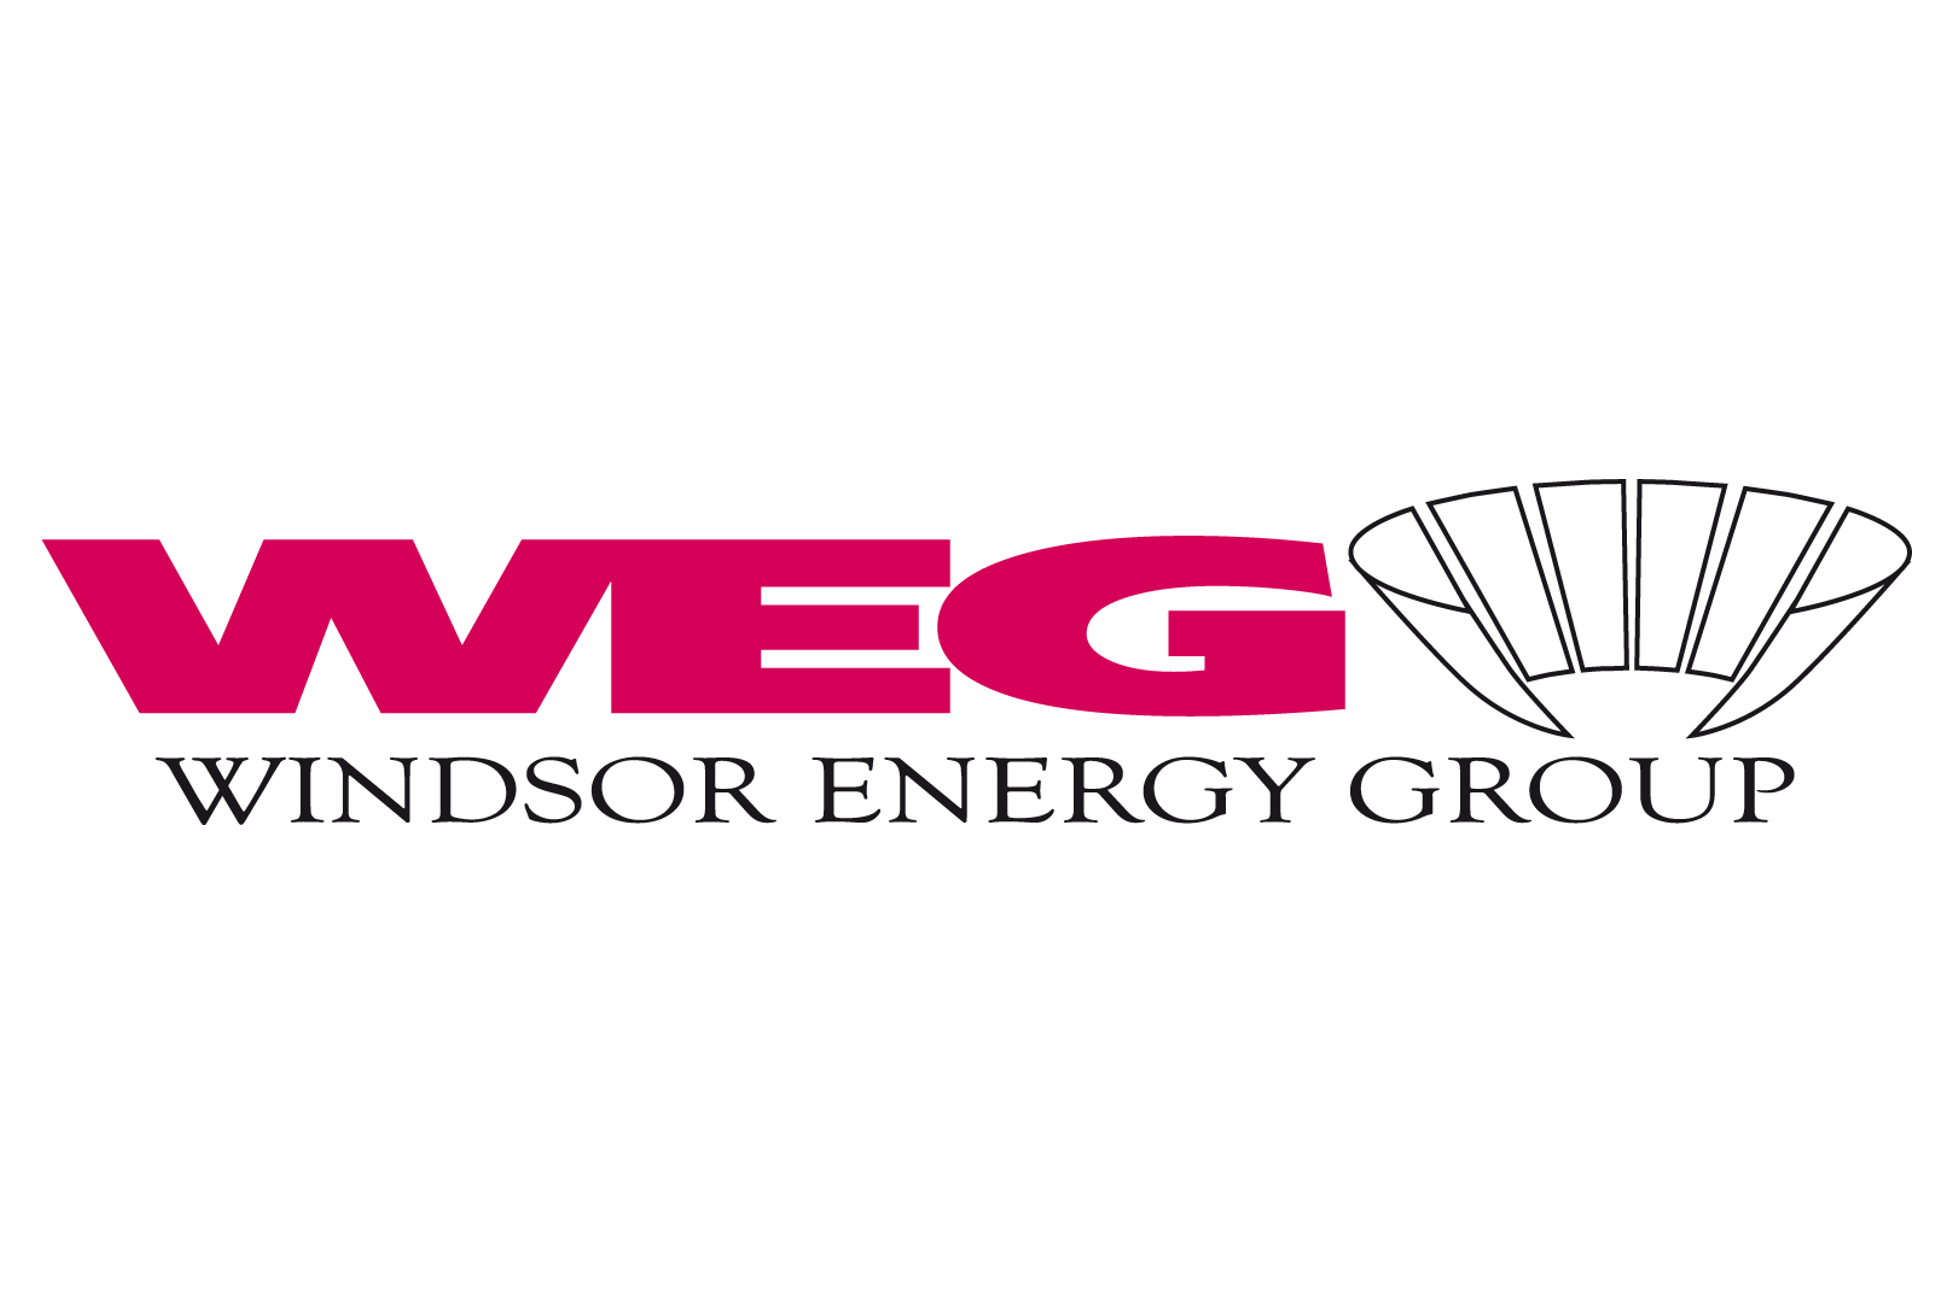 Oxford Sigma Presents at the Windsor Energy Group